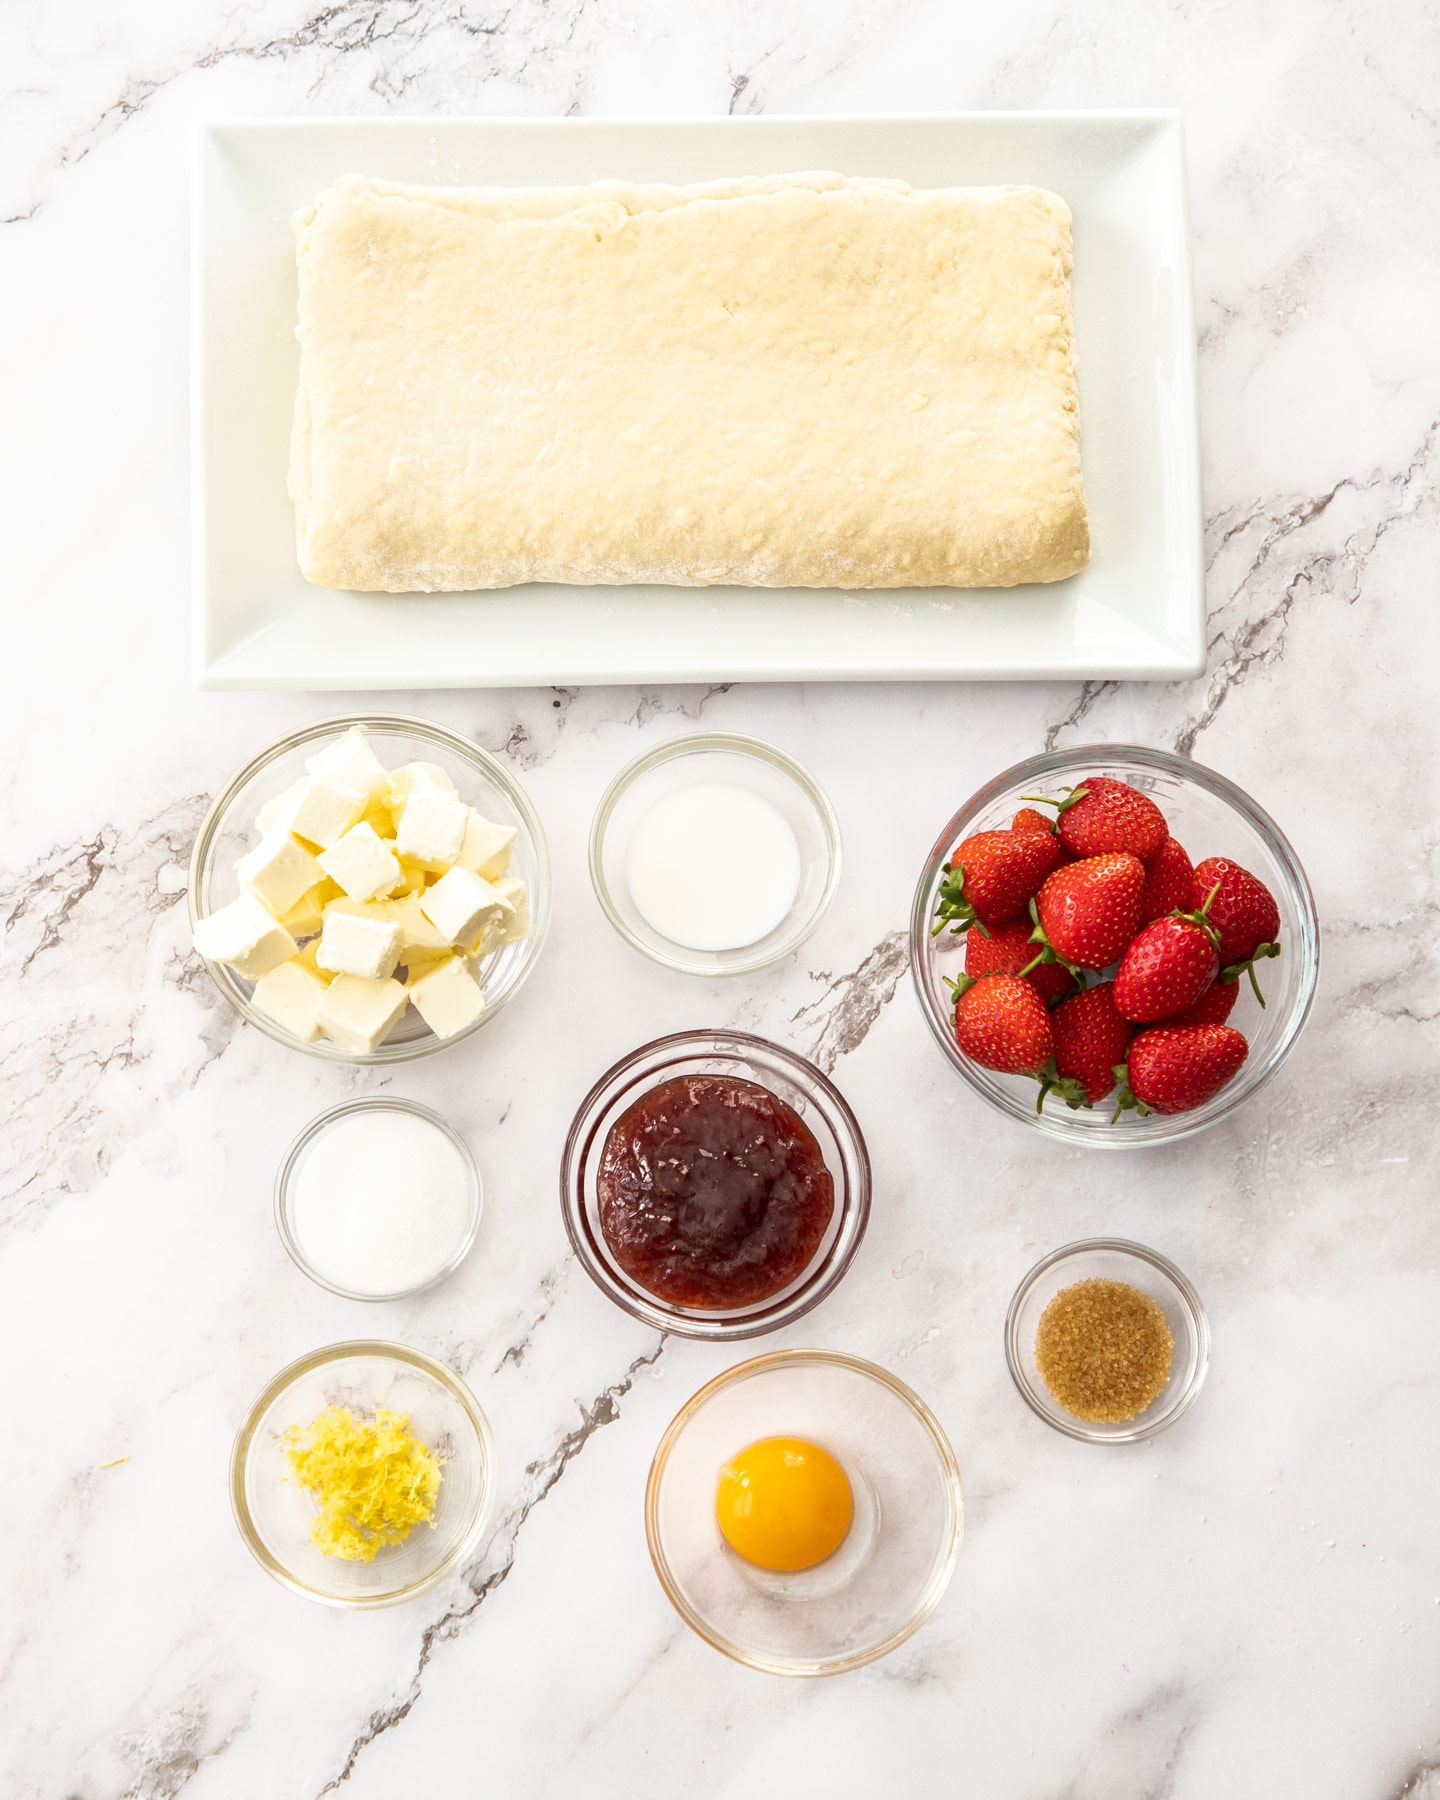 Ingredients for strawberry danishes.